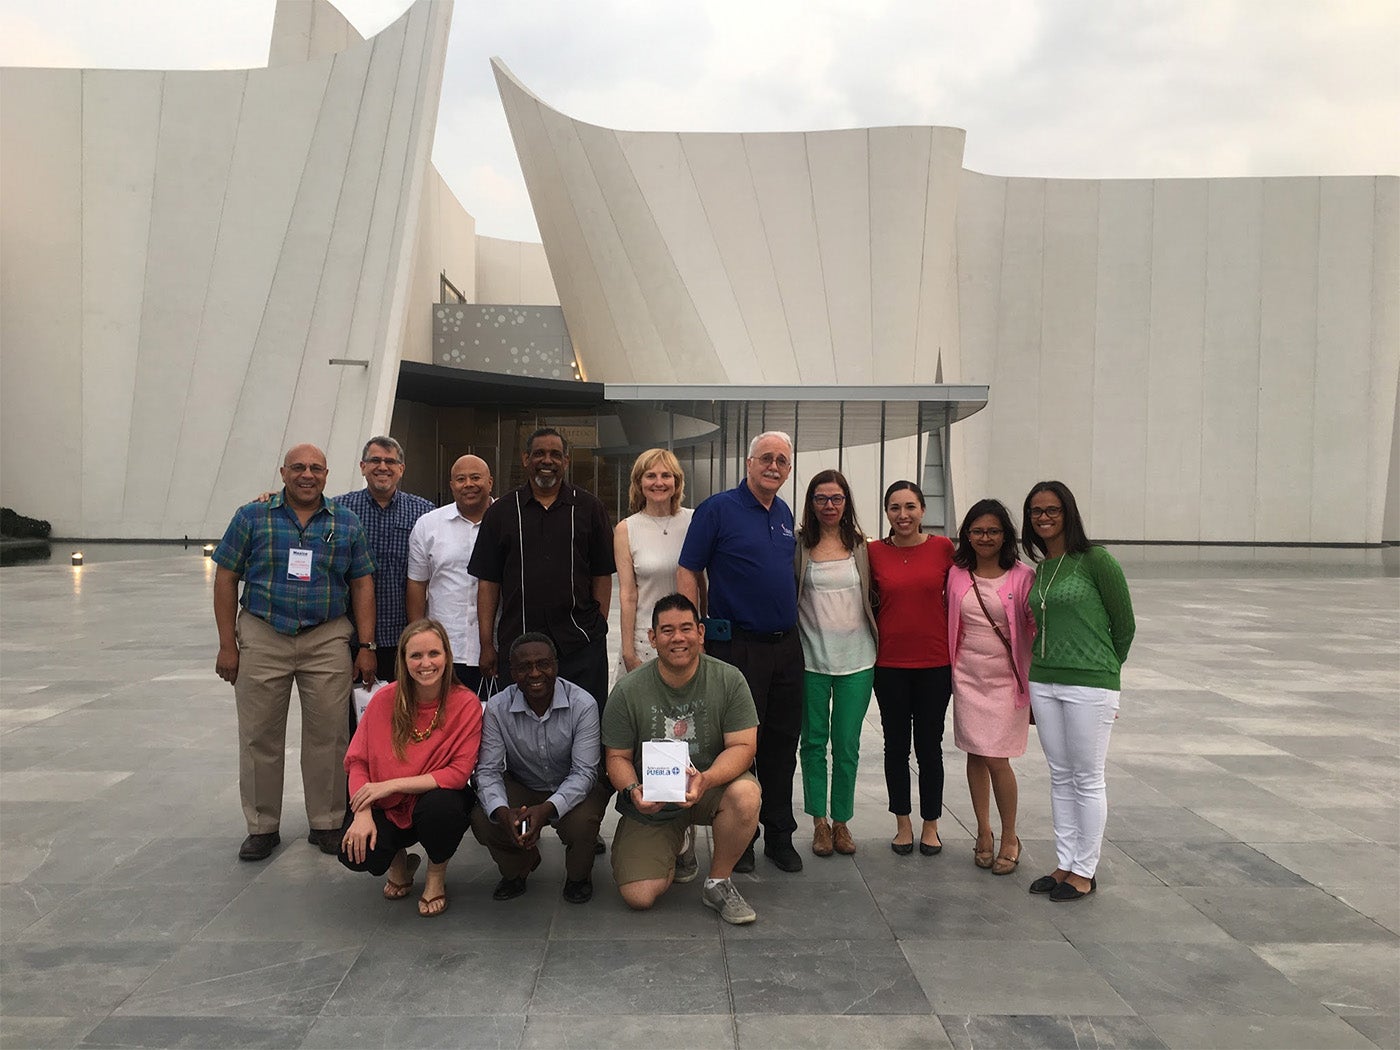 Delaware County Community College's Director of International Programs and Partnerships Dr. Sabuur Abdul-Kareem (far left) attended a workshop in Mexico with nine colleagues from universities in the U.S. The workshop was aimed at increasing student mobility and academic partnerships between the U.S. and Mexico.